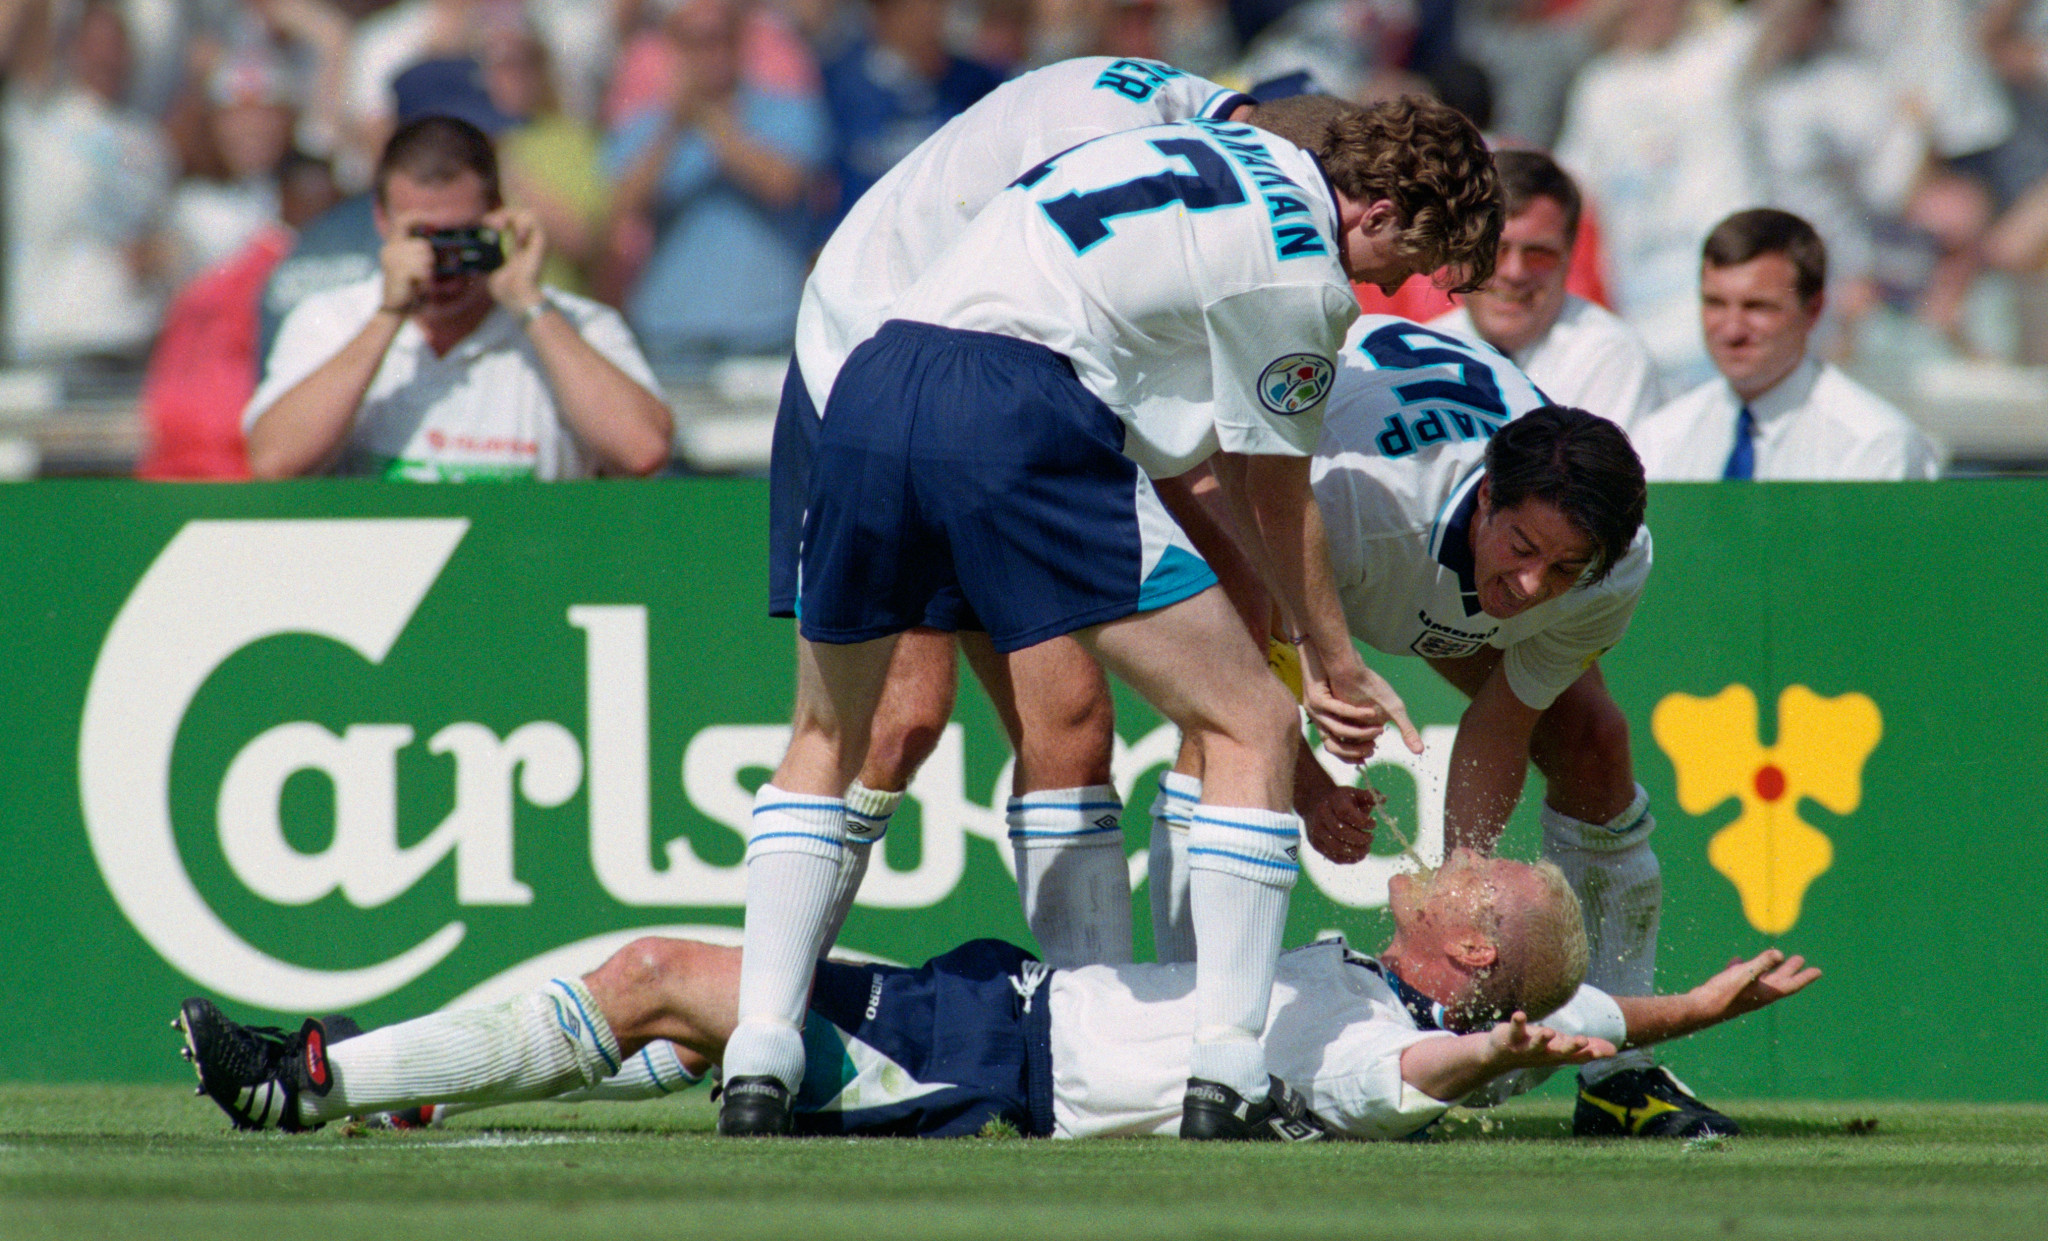 When Scotland and England last played each other at the Euros, Paul Gascoigne performed his infamous dentist chair celebration ©Getty Images